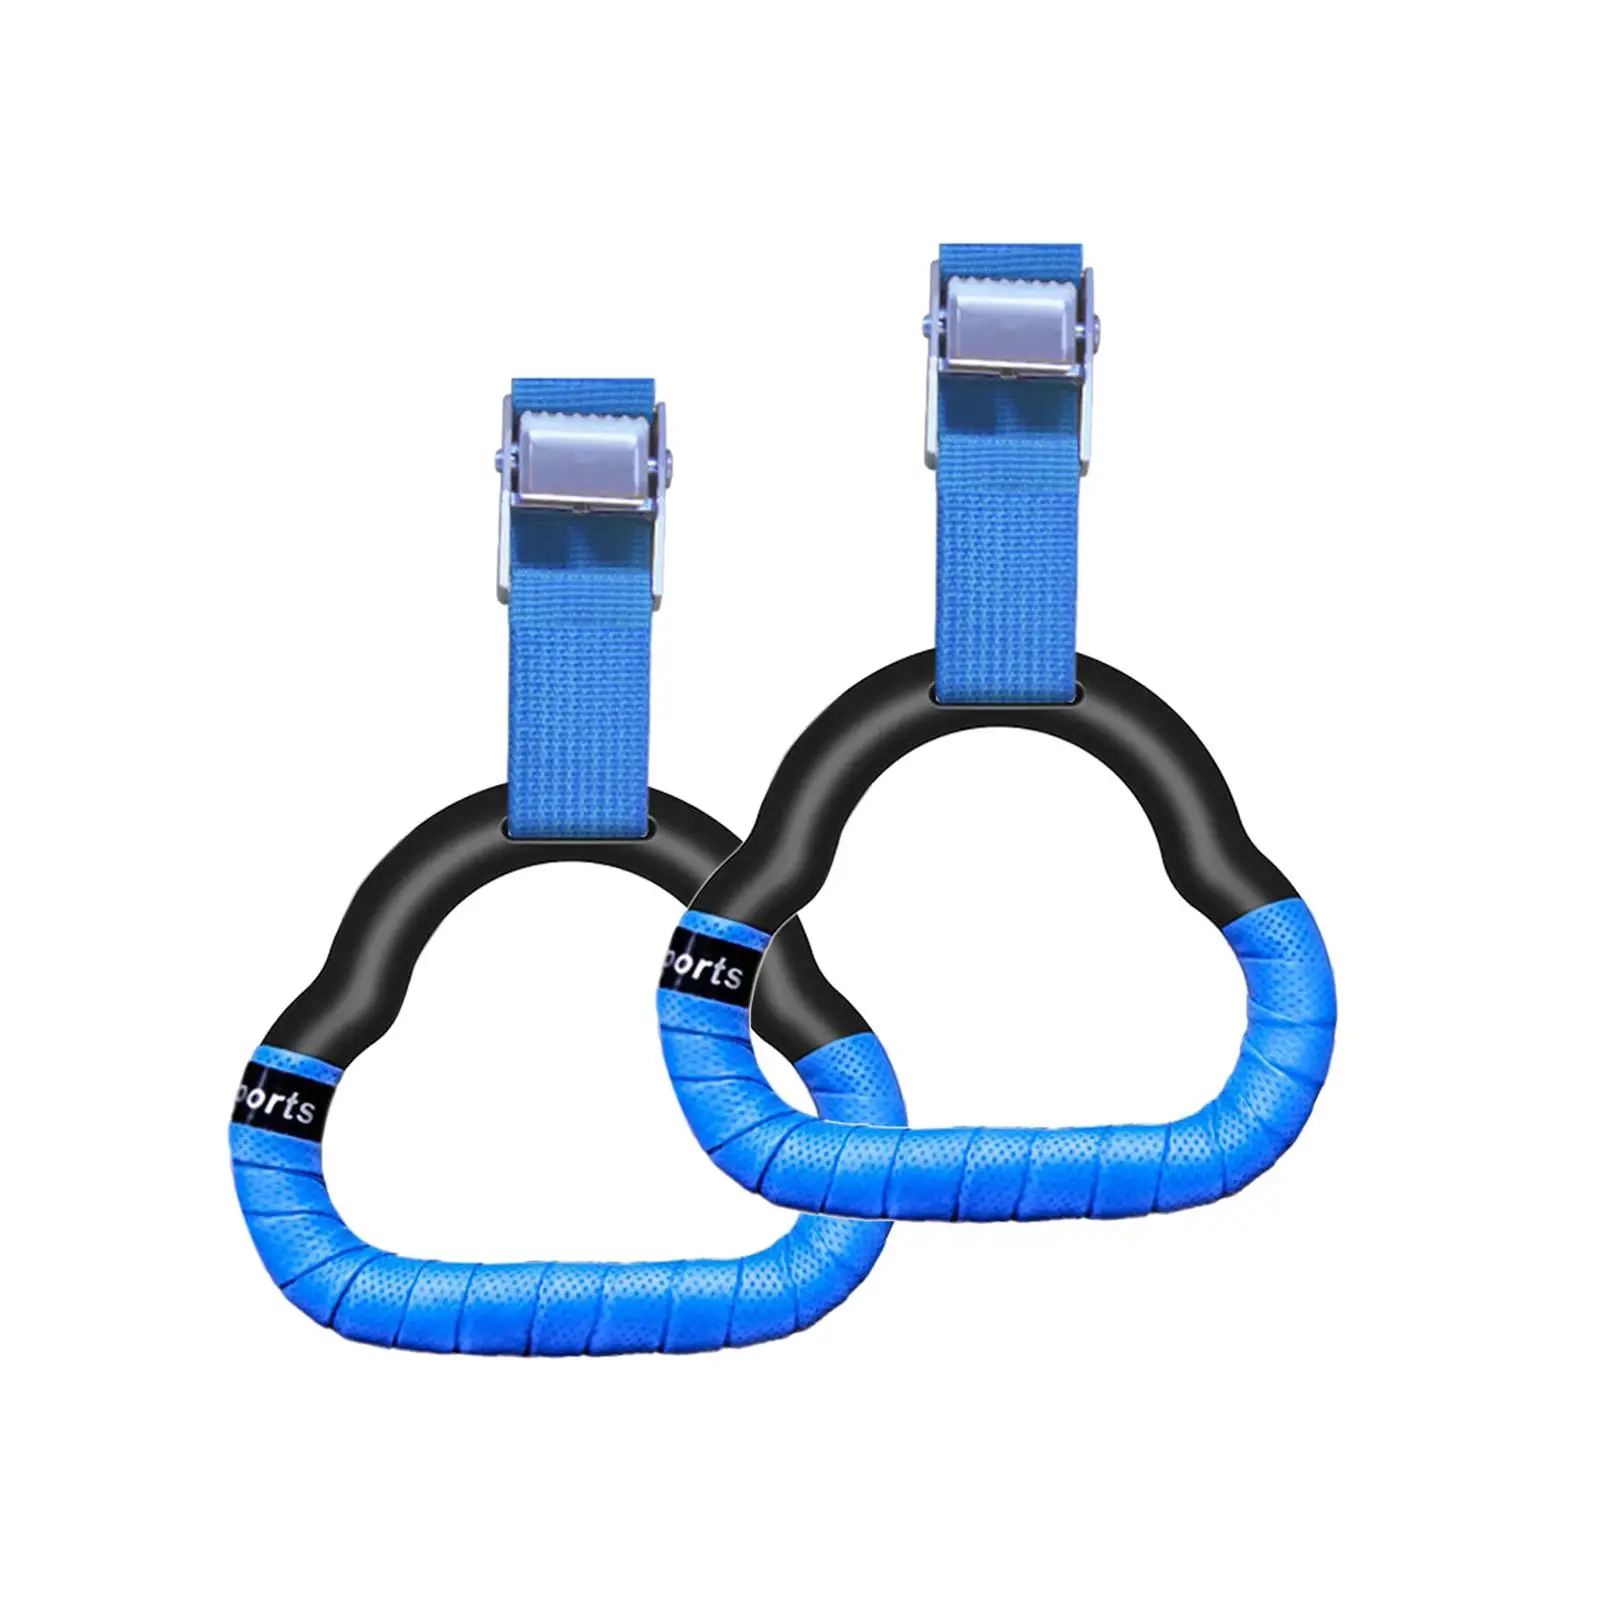 Gymnastics Rings Non Slip Adjustable Training Rings Children Training Gym Ring Exercise Rings for Full Body Workout Home Gym